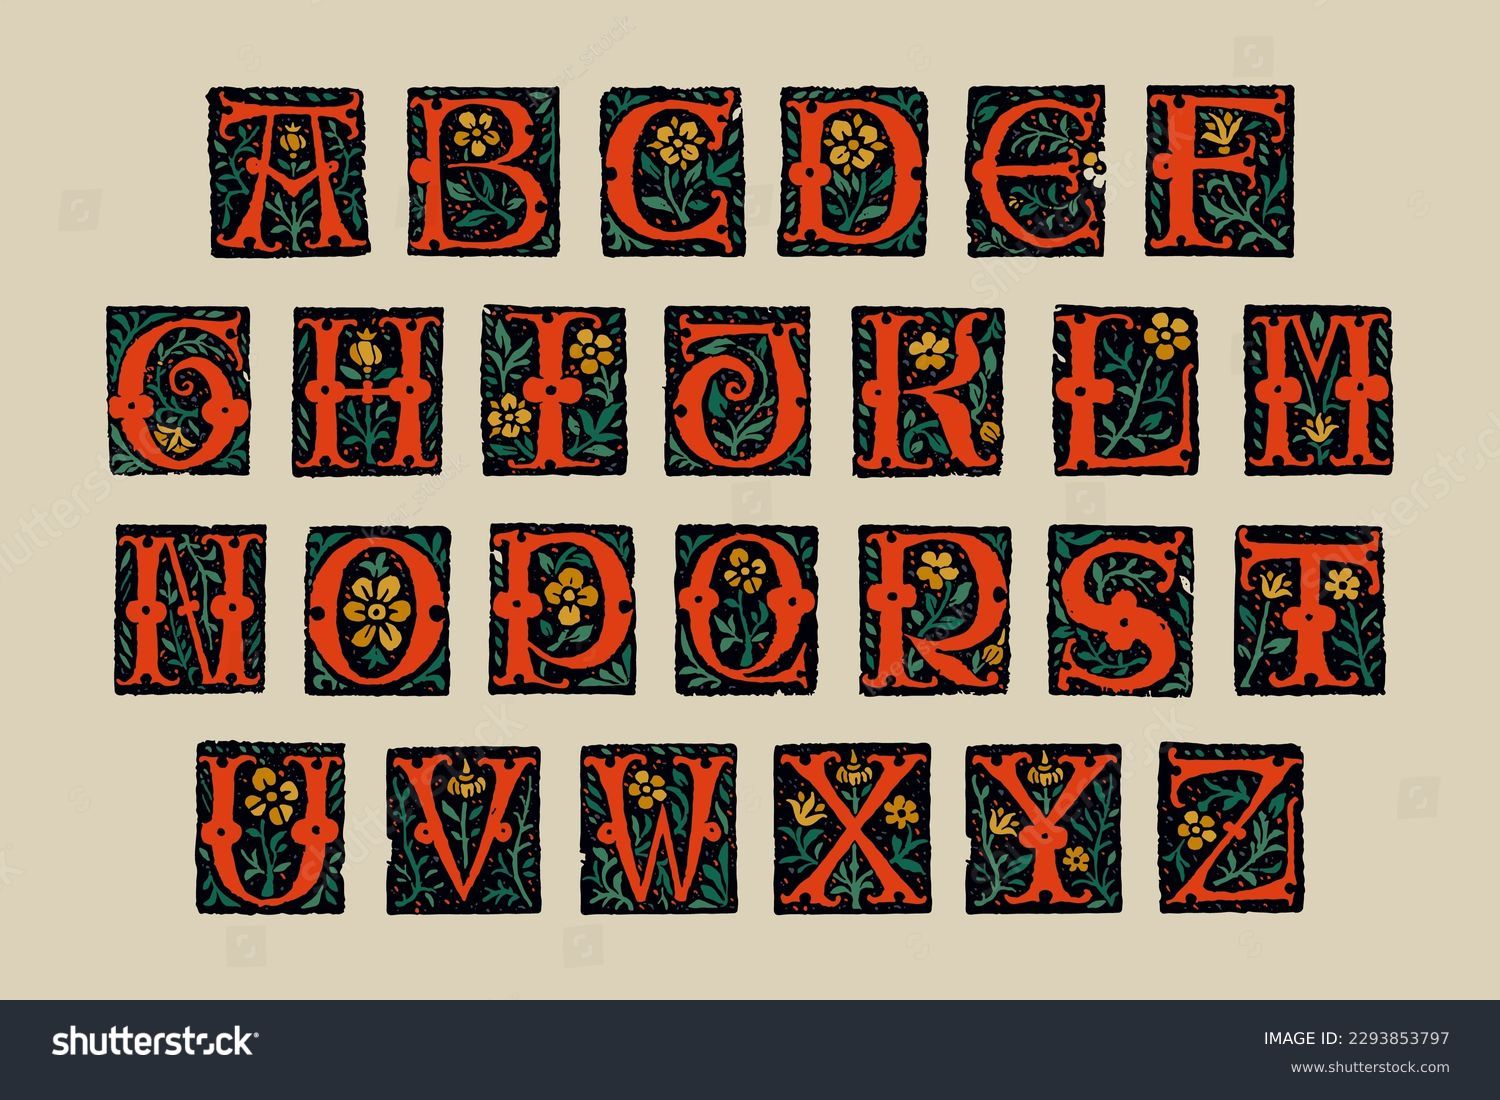 Medieval alphabet. Grunge gothic initials. 16th century engraved drop caps. Blackletter style vintage font. Middle Ages capital letters with floral ornament. Vector square illuminated calligraphy. #2293853797